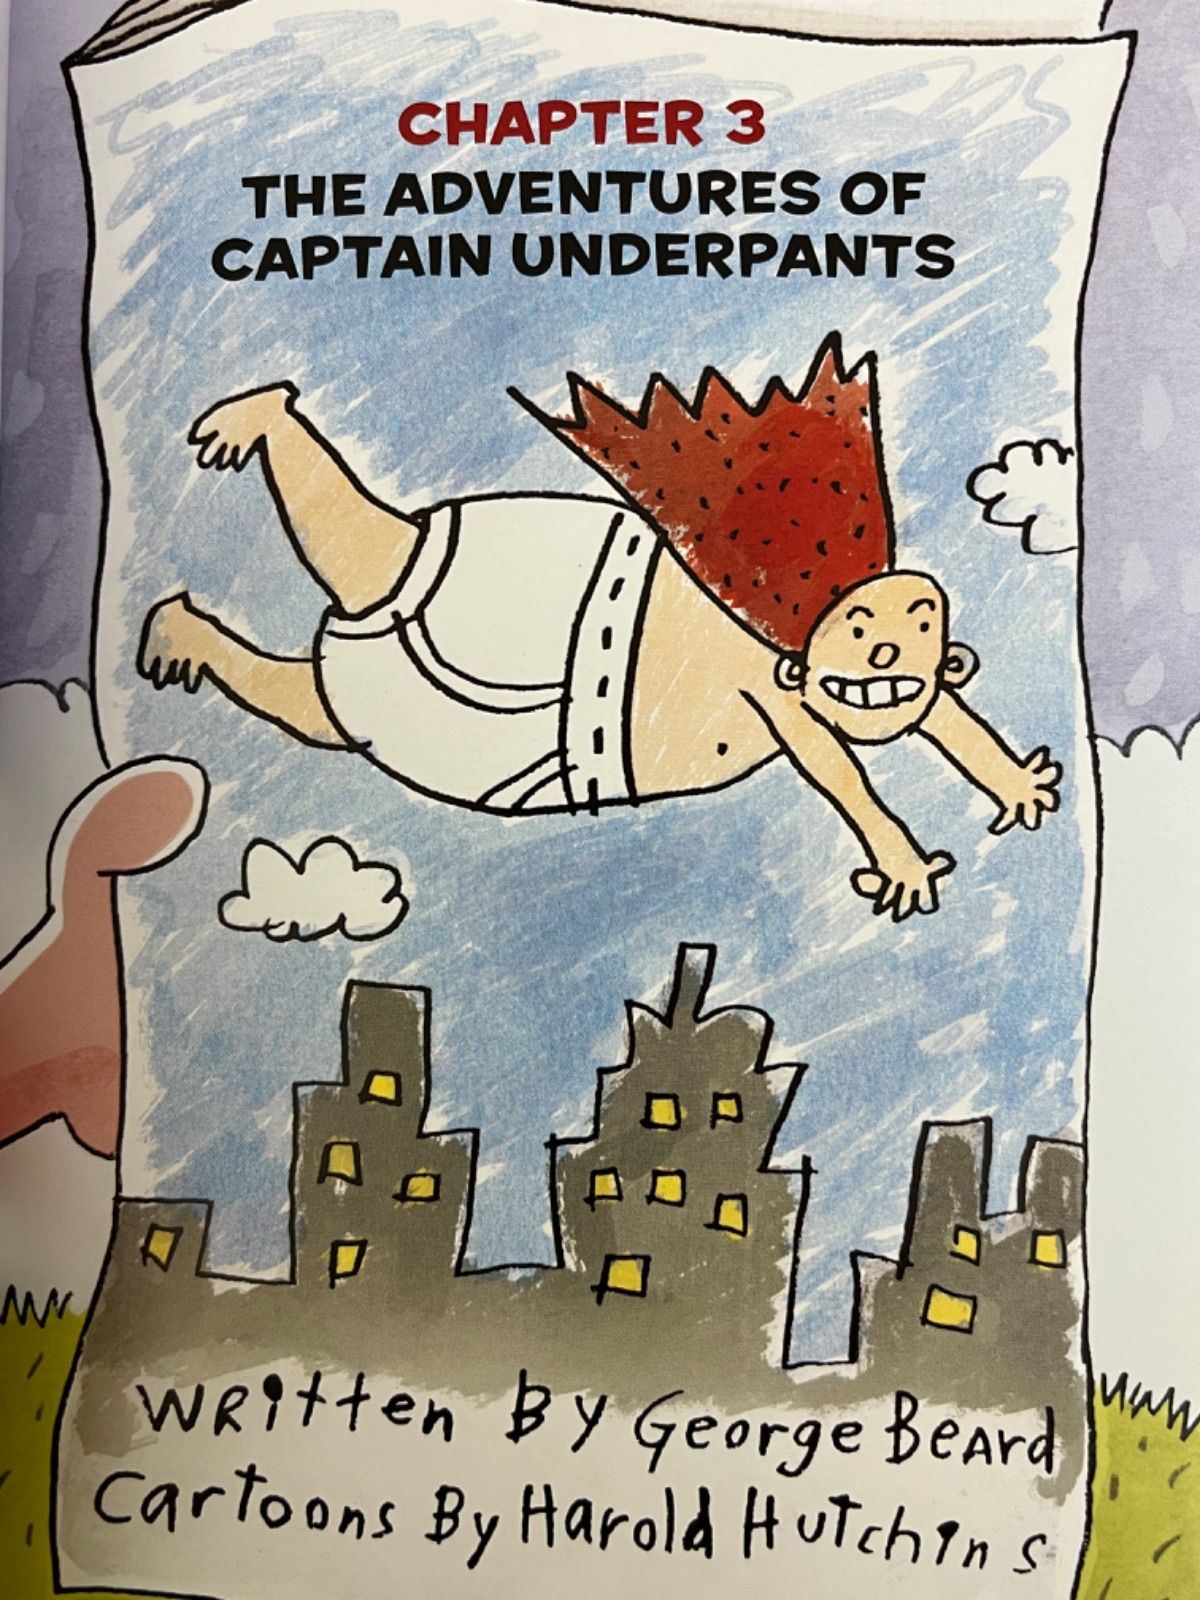 The Adventures of Captain Underpants by Dav Pilkey - Audiobook